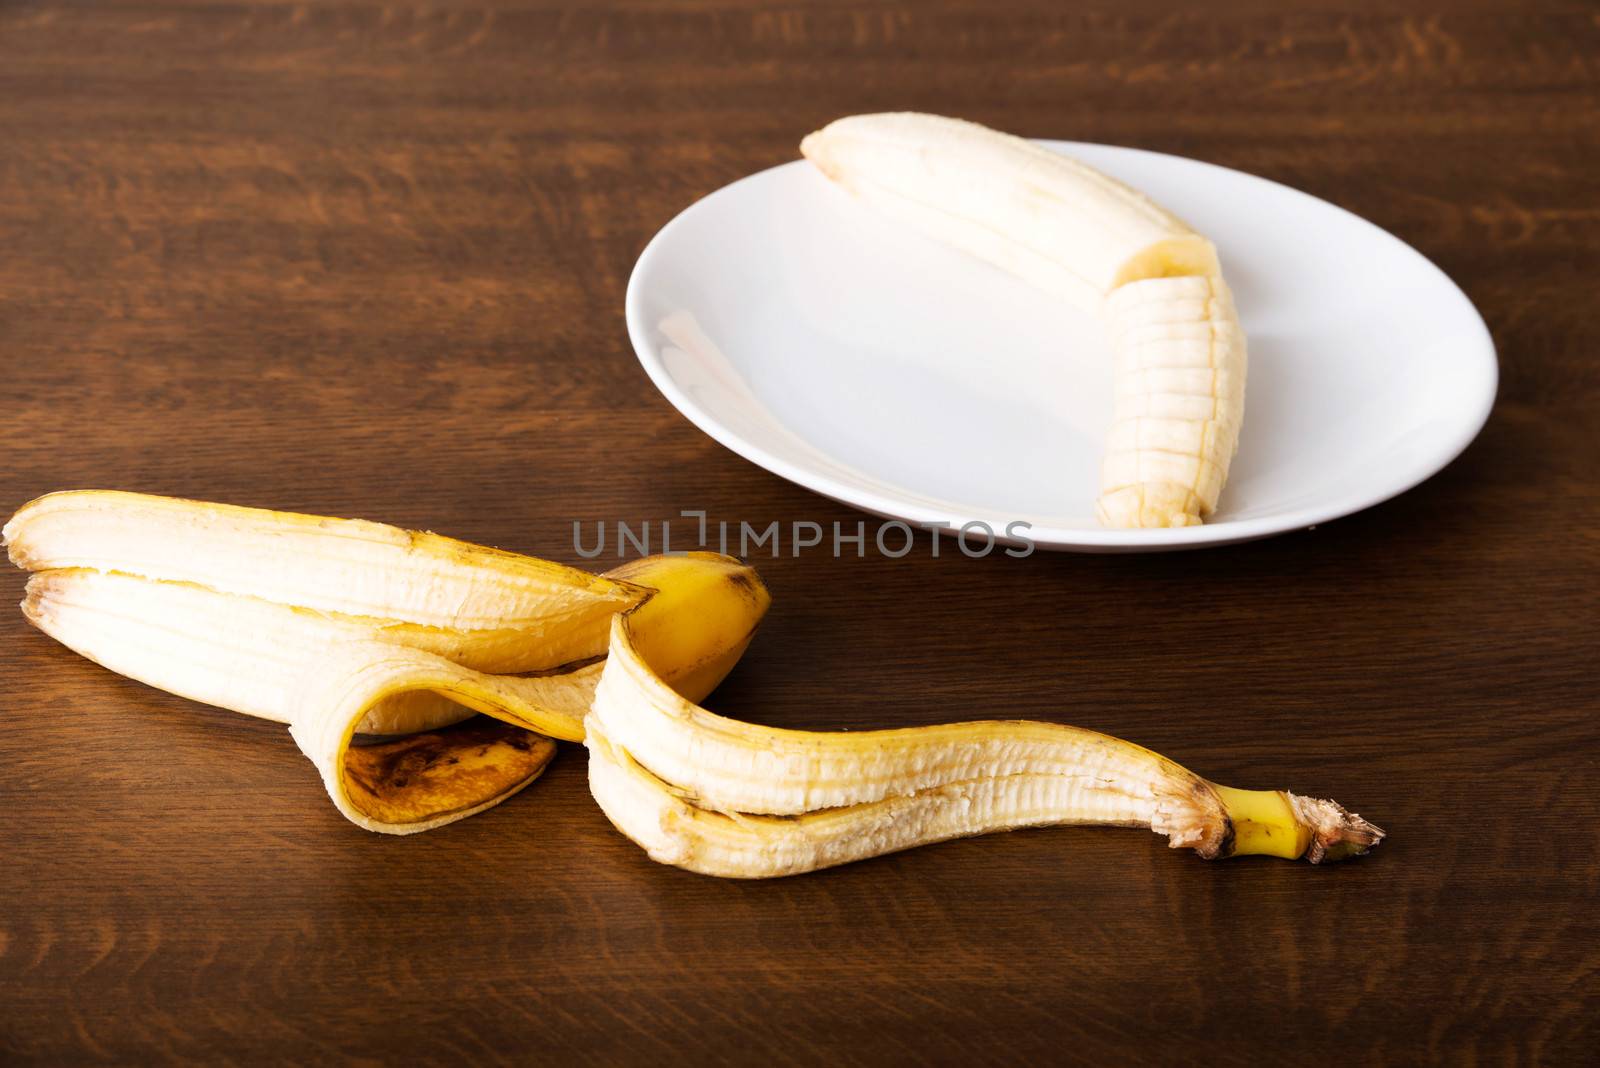 Pilled banana on a plate and its skin lying next to it. Over wooden background.